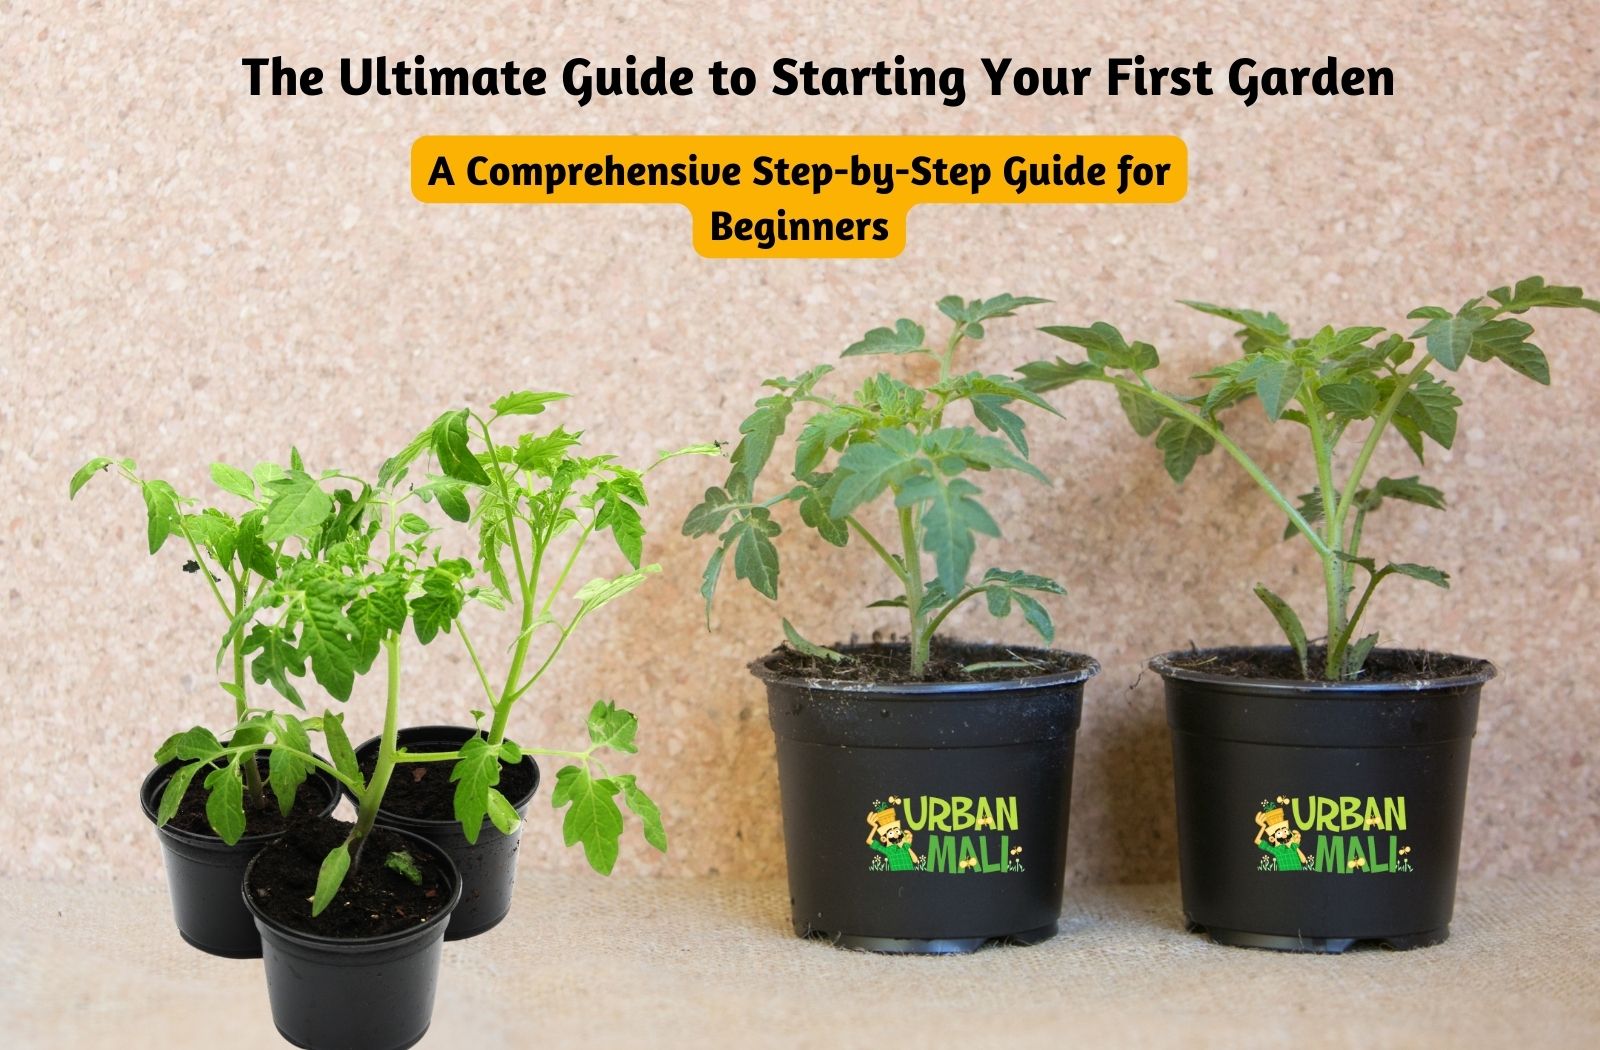 The Ultimate Guide to Starting Your First Garden: A Comprehensive Step-by-Step Guide for Beginners